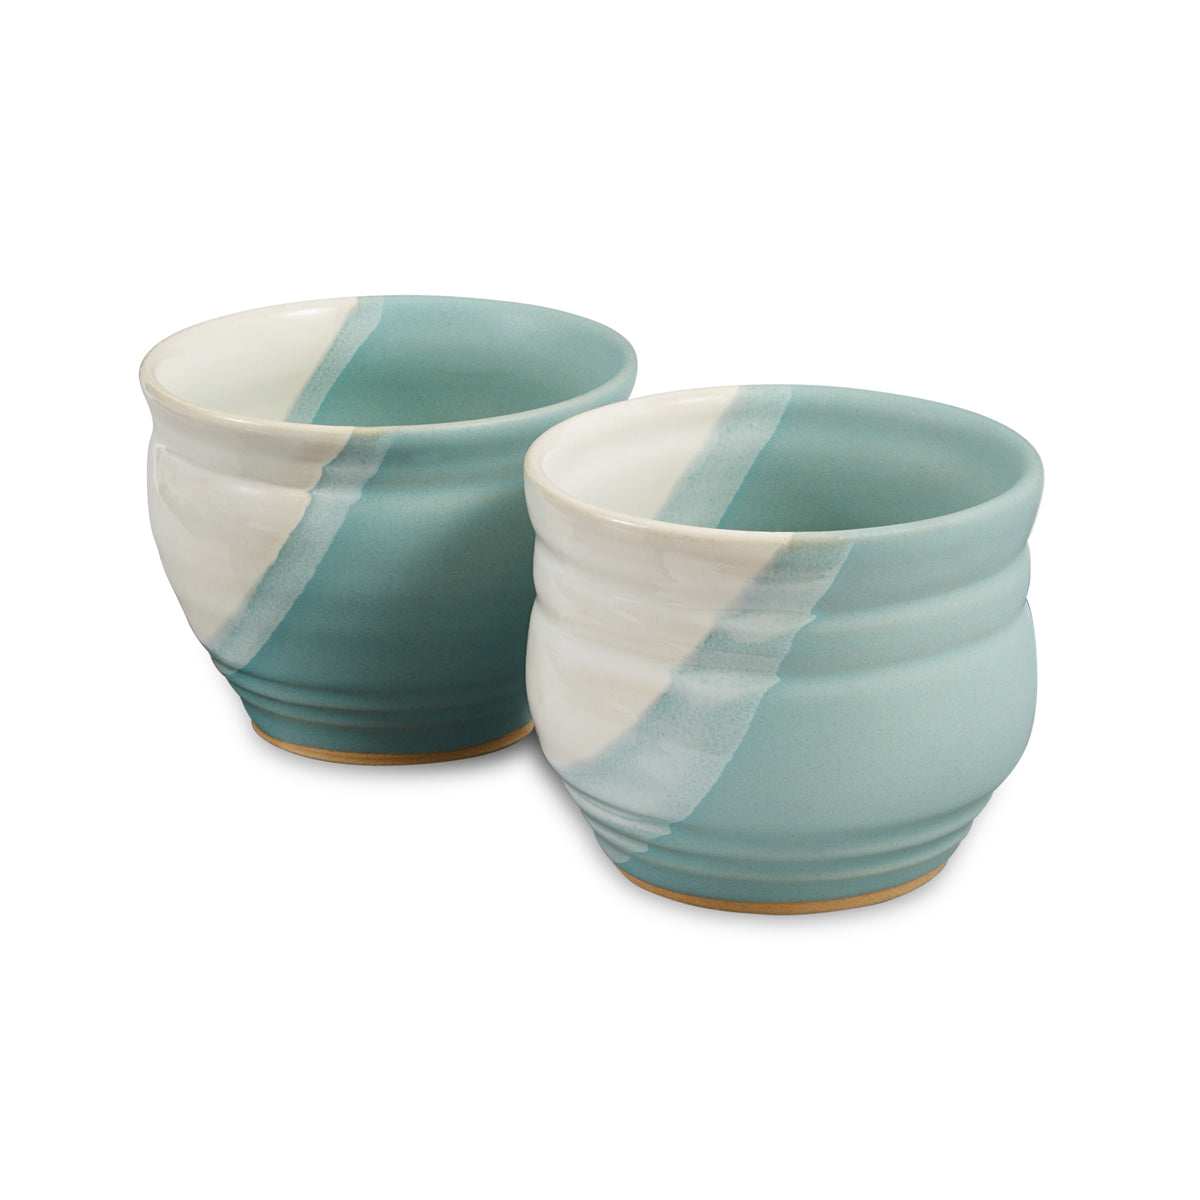 Whiskey Cups Set of 2